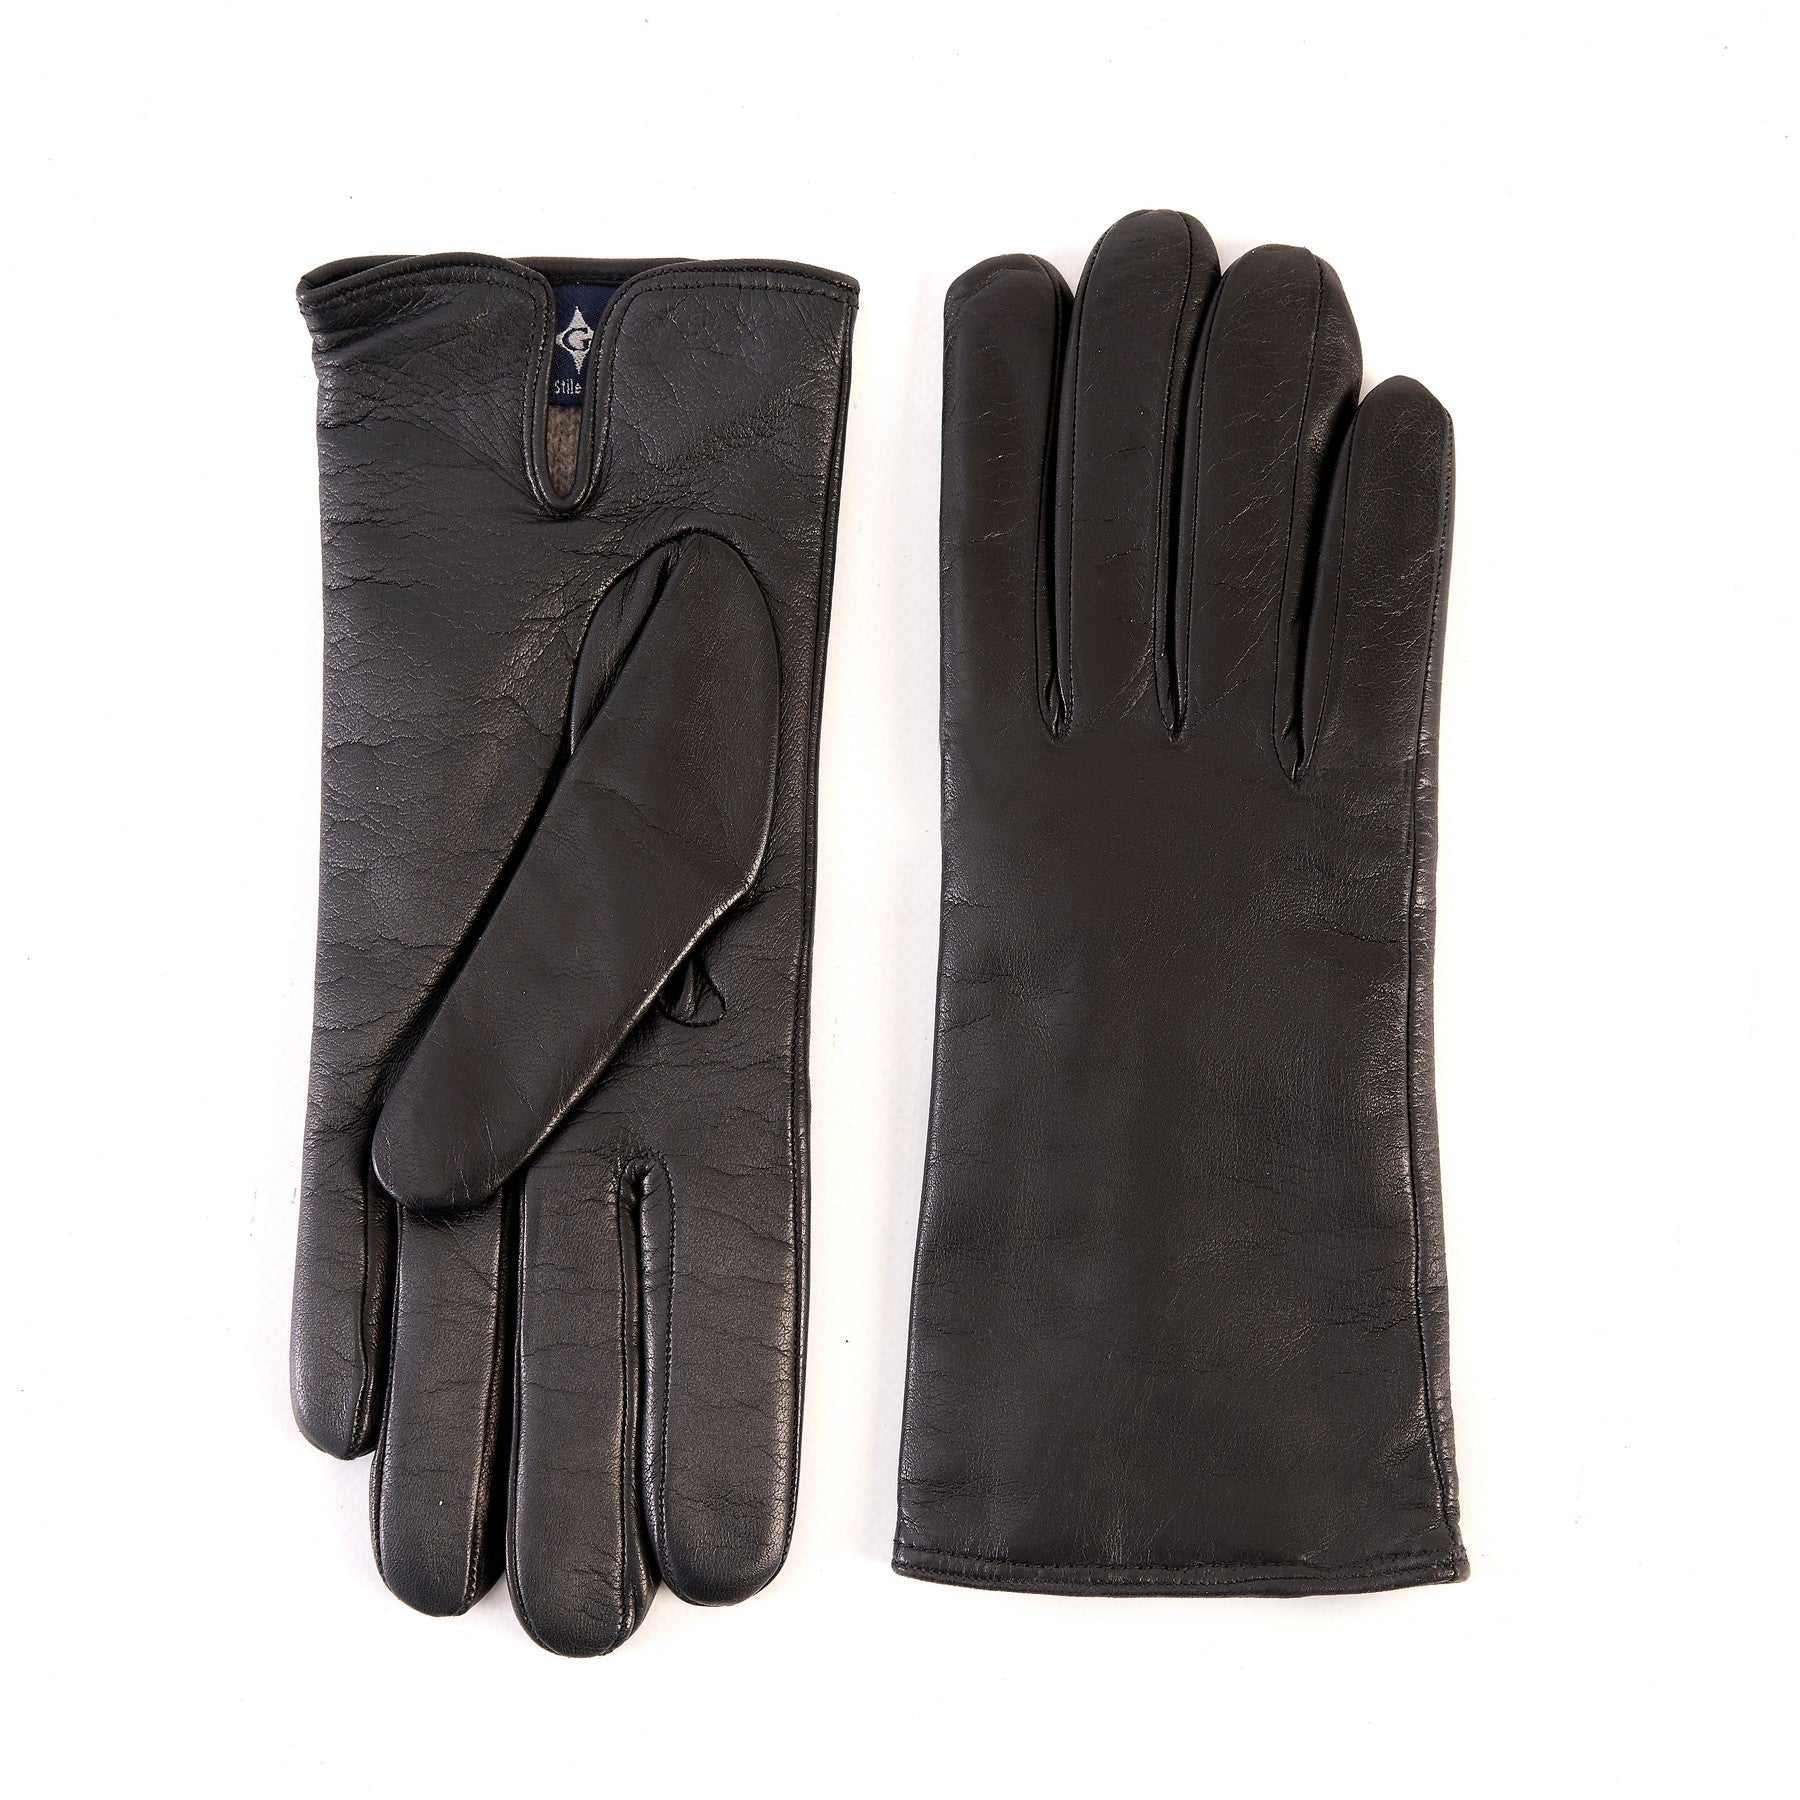 Women’s basic black soft nappa touchscreen leather gloves with palm opening and mix cashmere lining